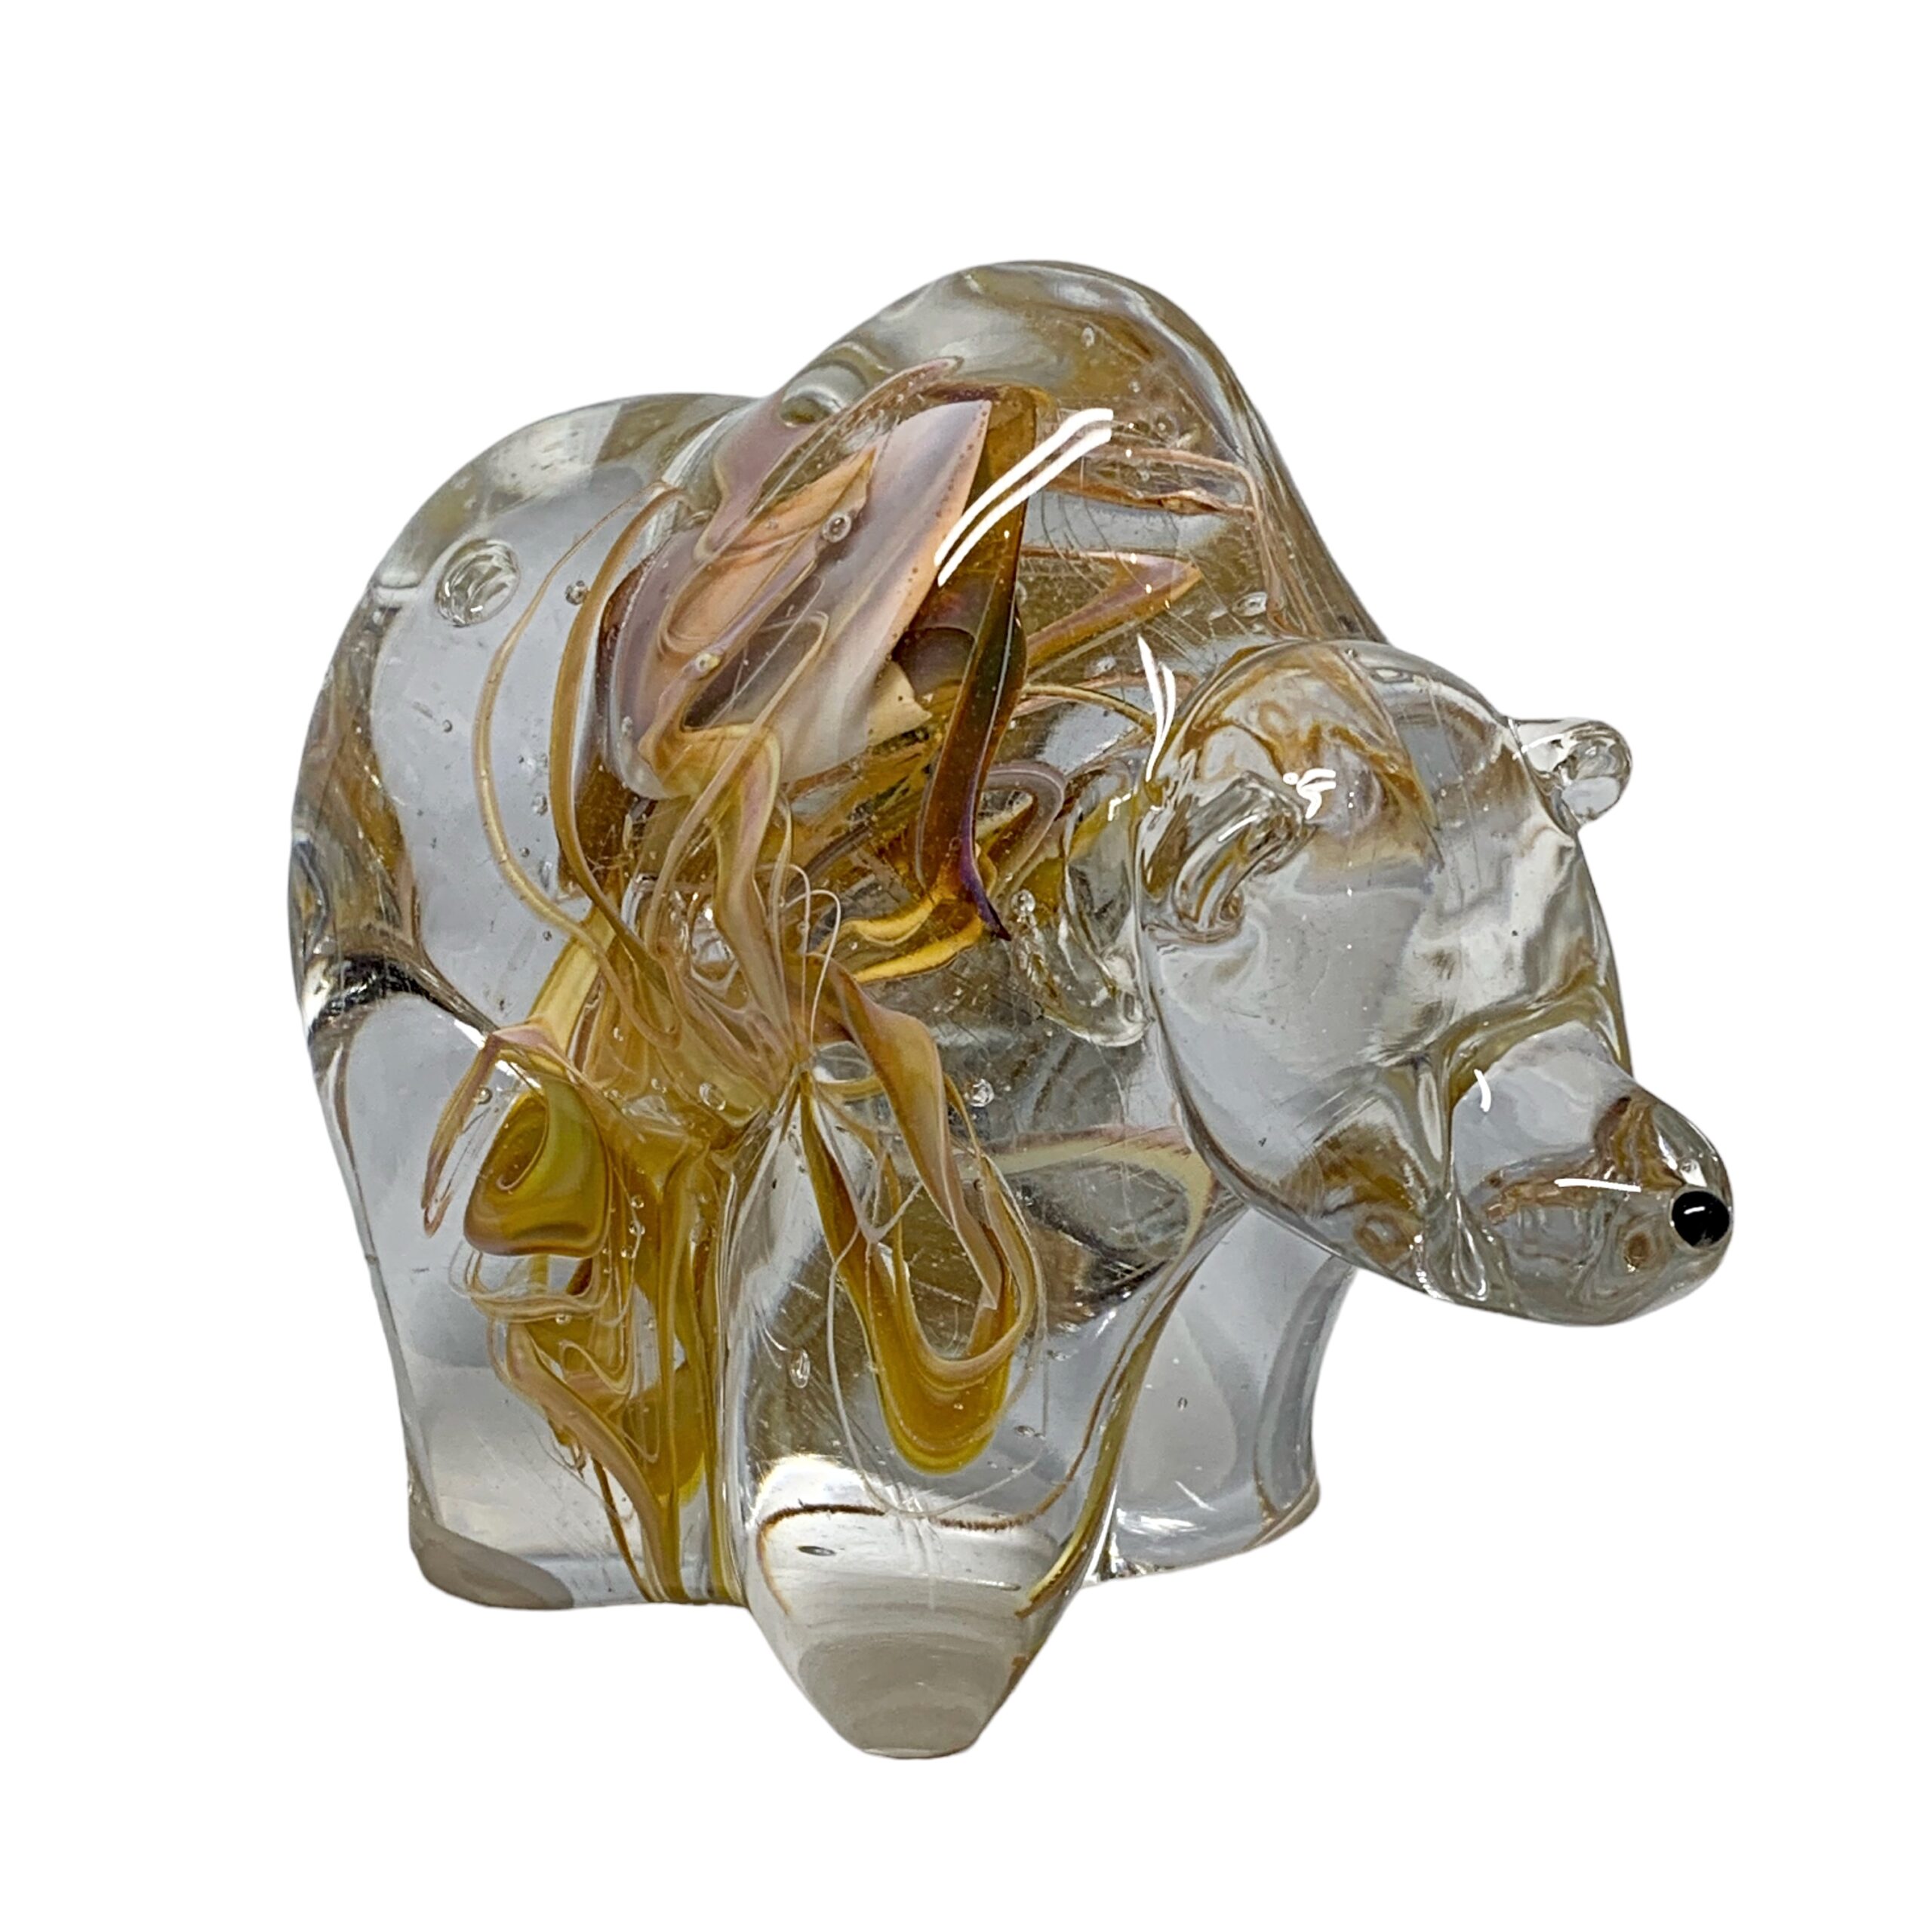 Galaxy Bear 6, blown glass bear by Hayden MacRae at Effusion Art Gallery in Invermere, BC